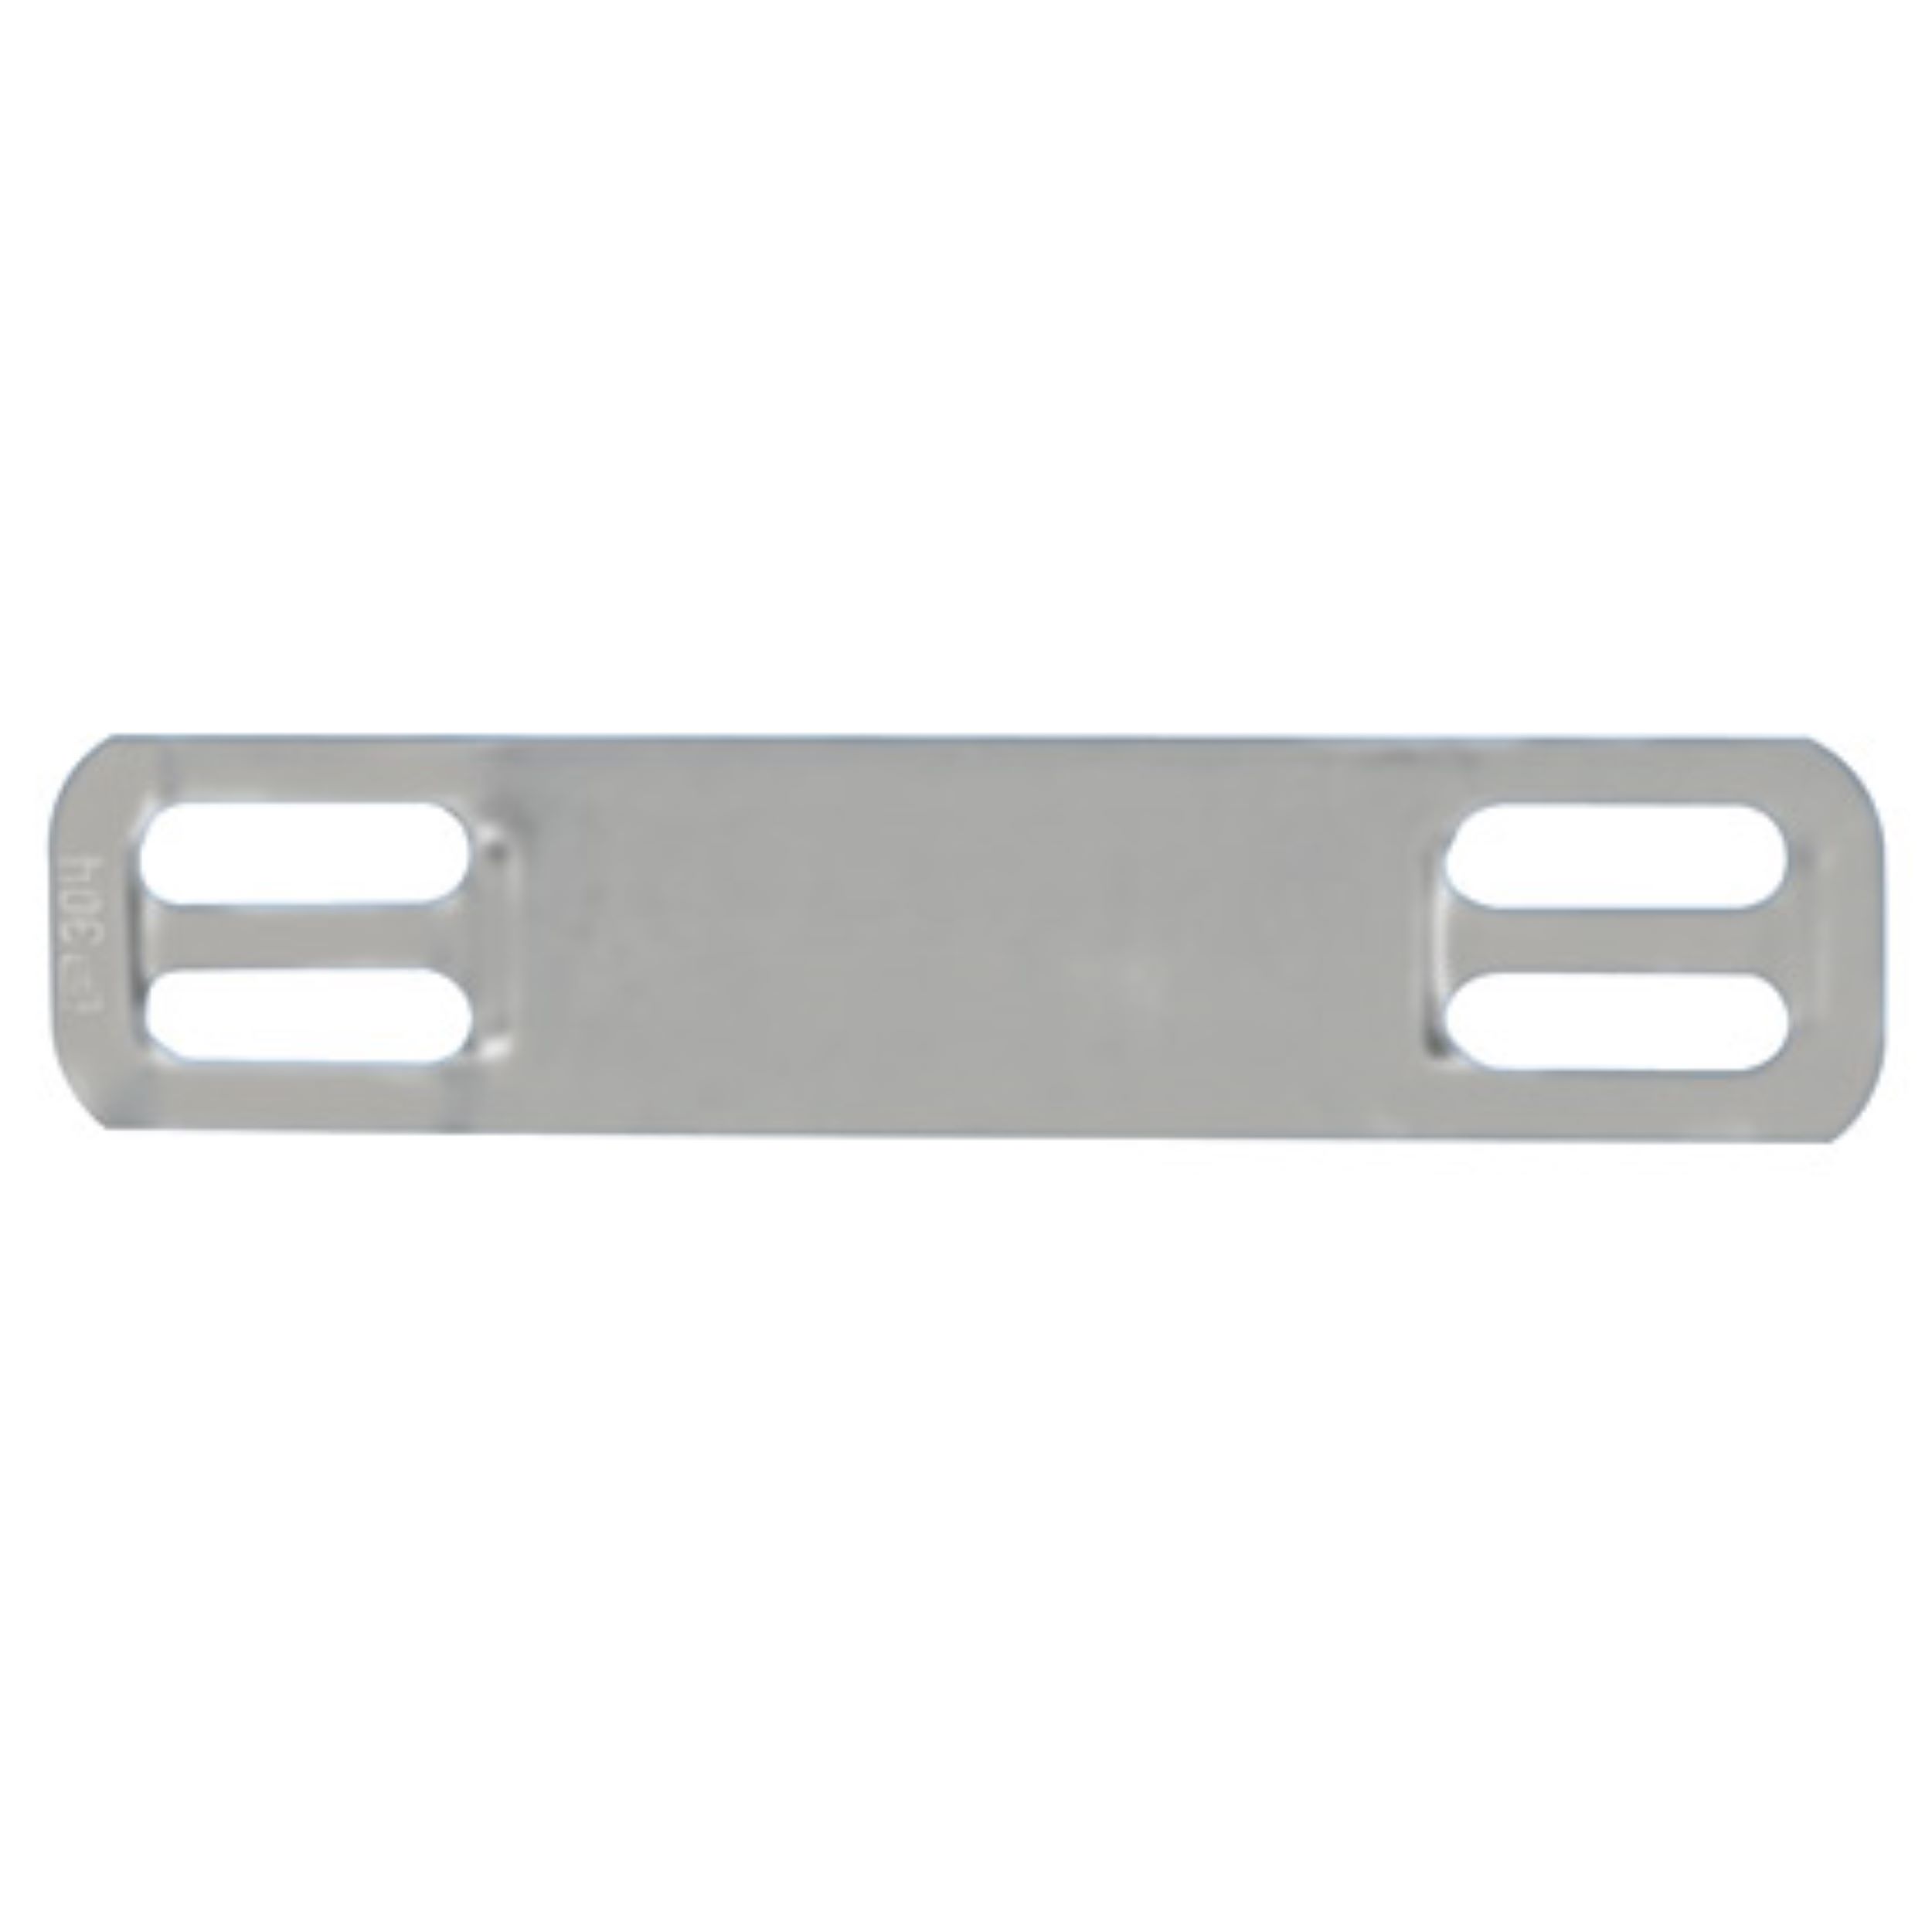 MMP172W38-M316 Marker Plate and Tag, 316 SS, 1.72"x0.38", PK1000